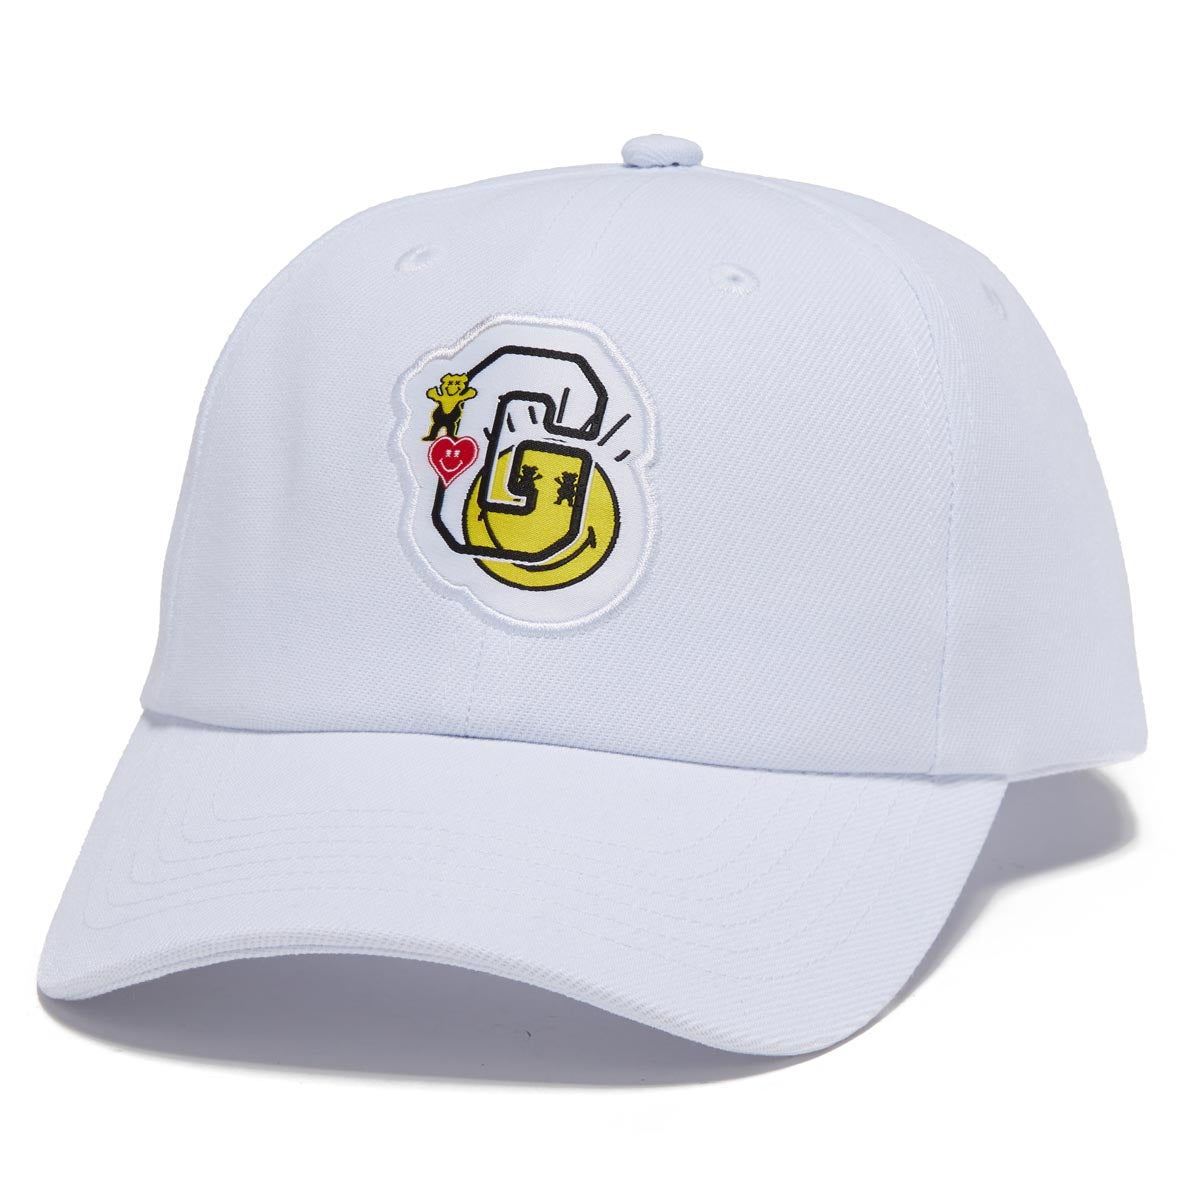 Grizzly x Smiley World Dad Hat - White image 1